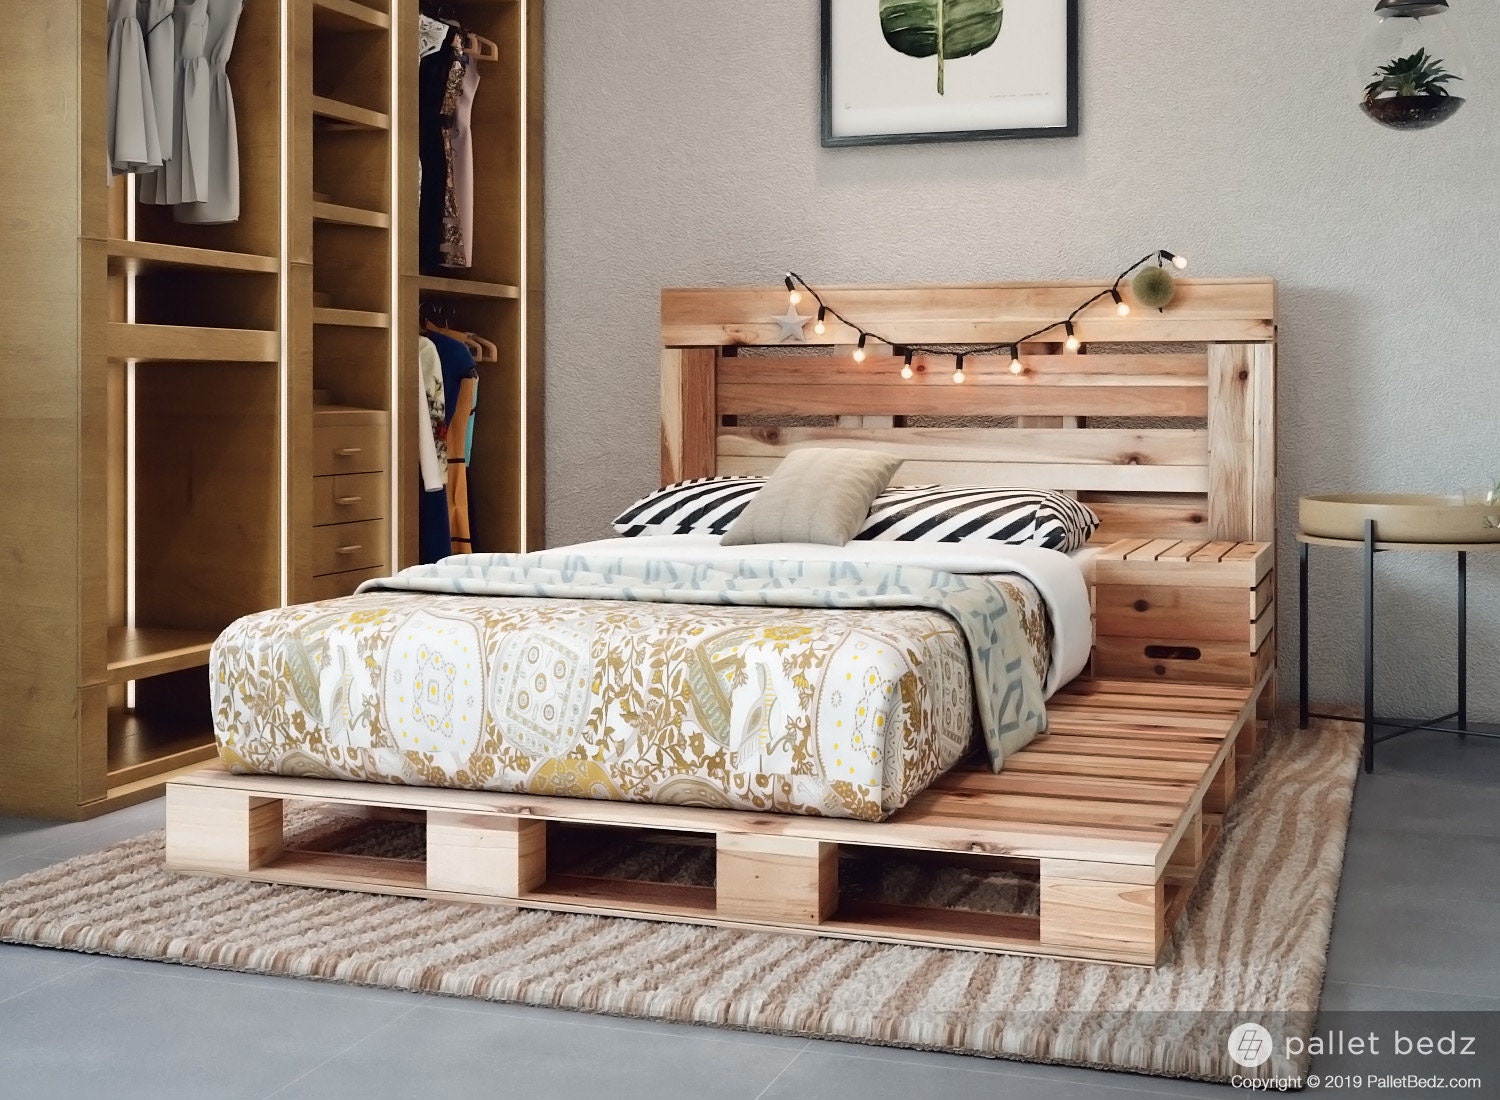 Pallet Bed the Twin Size Includes Headboard and Platform | Etsy